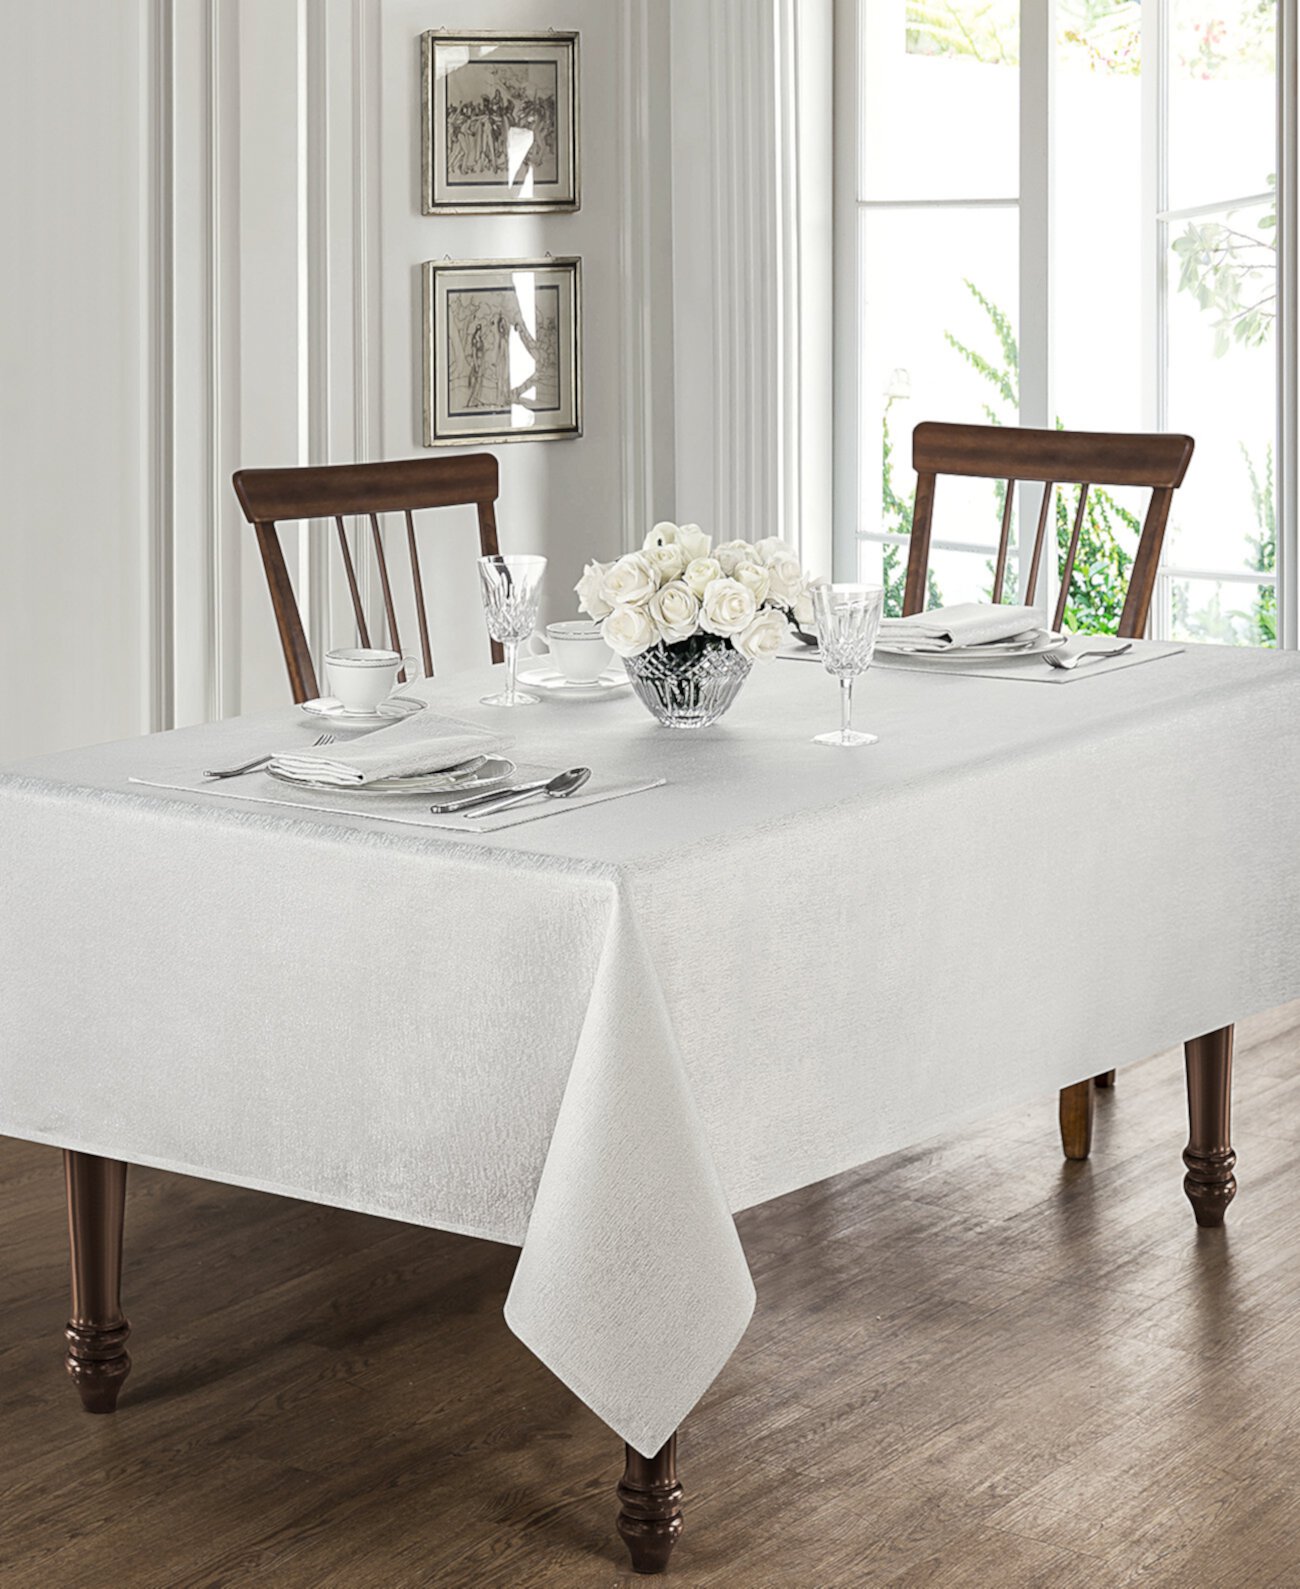 Moonscape White 70" x 84" Tablecloth Waterford